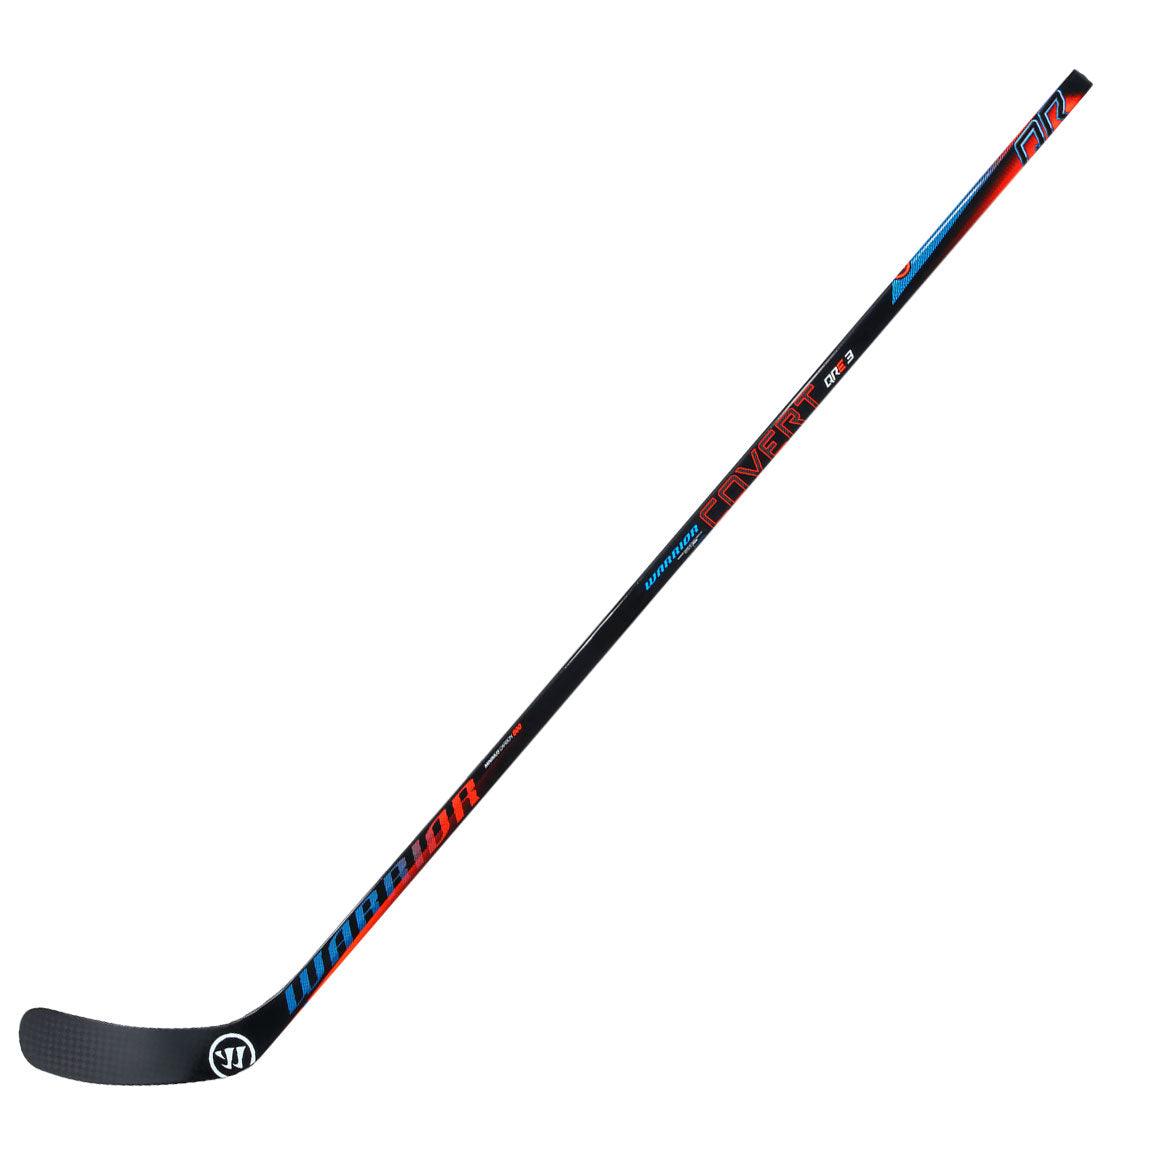 Covert QRE 3 Hockey Stick - Junior - Sports Excellence